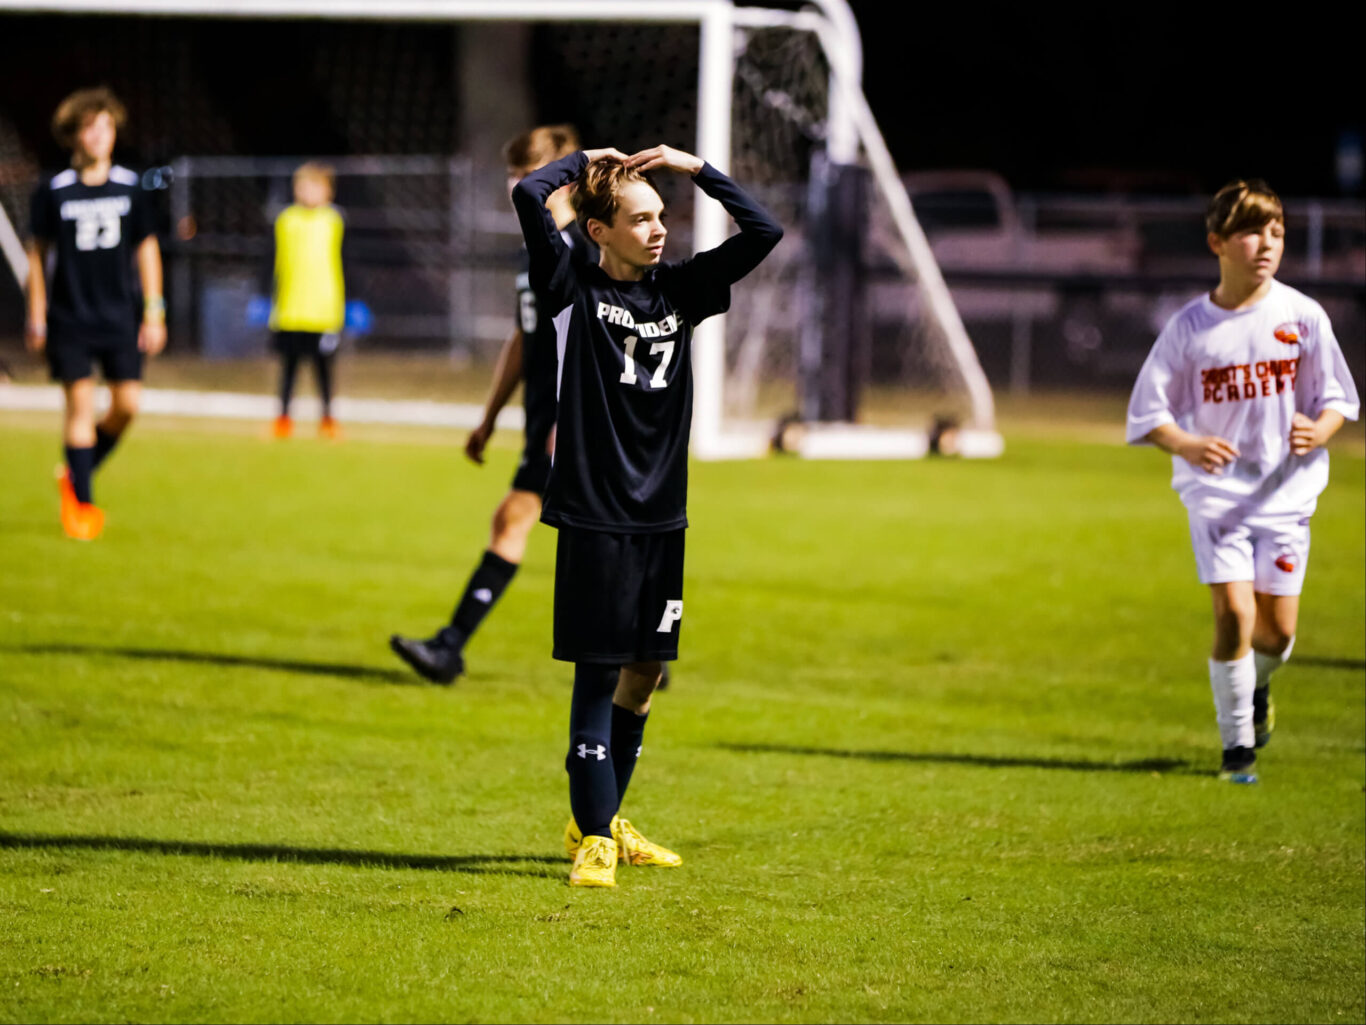 A soccer player reacts to a goal during a game.